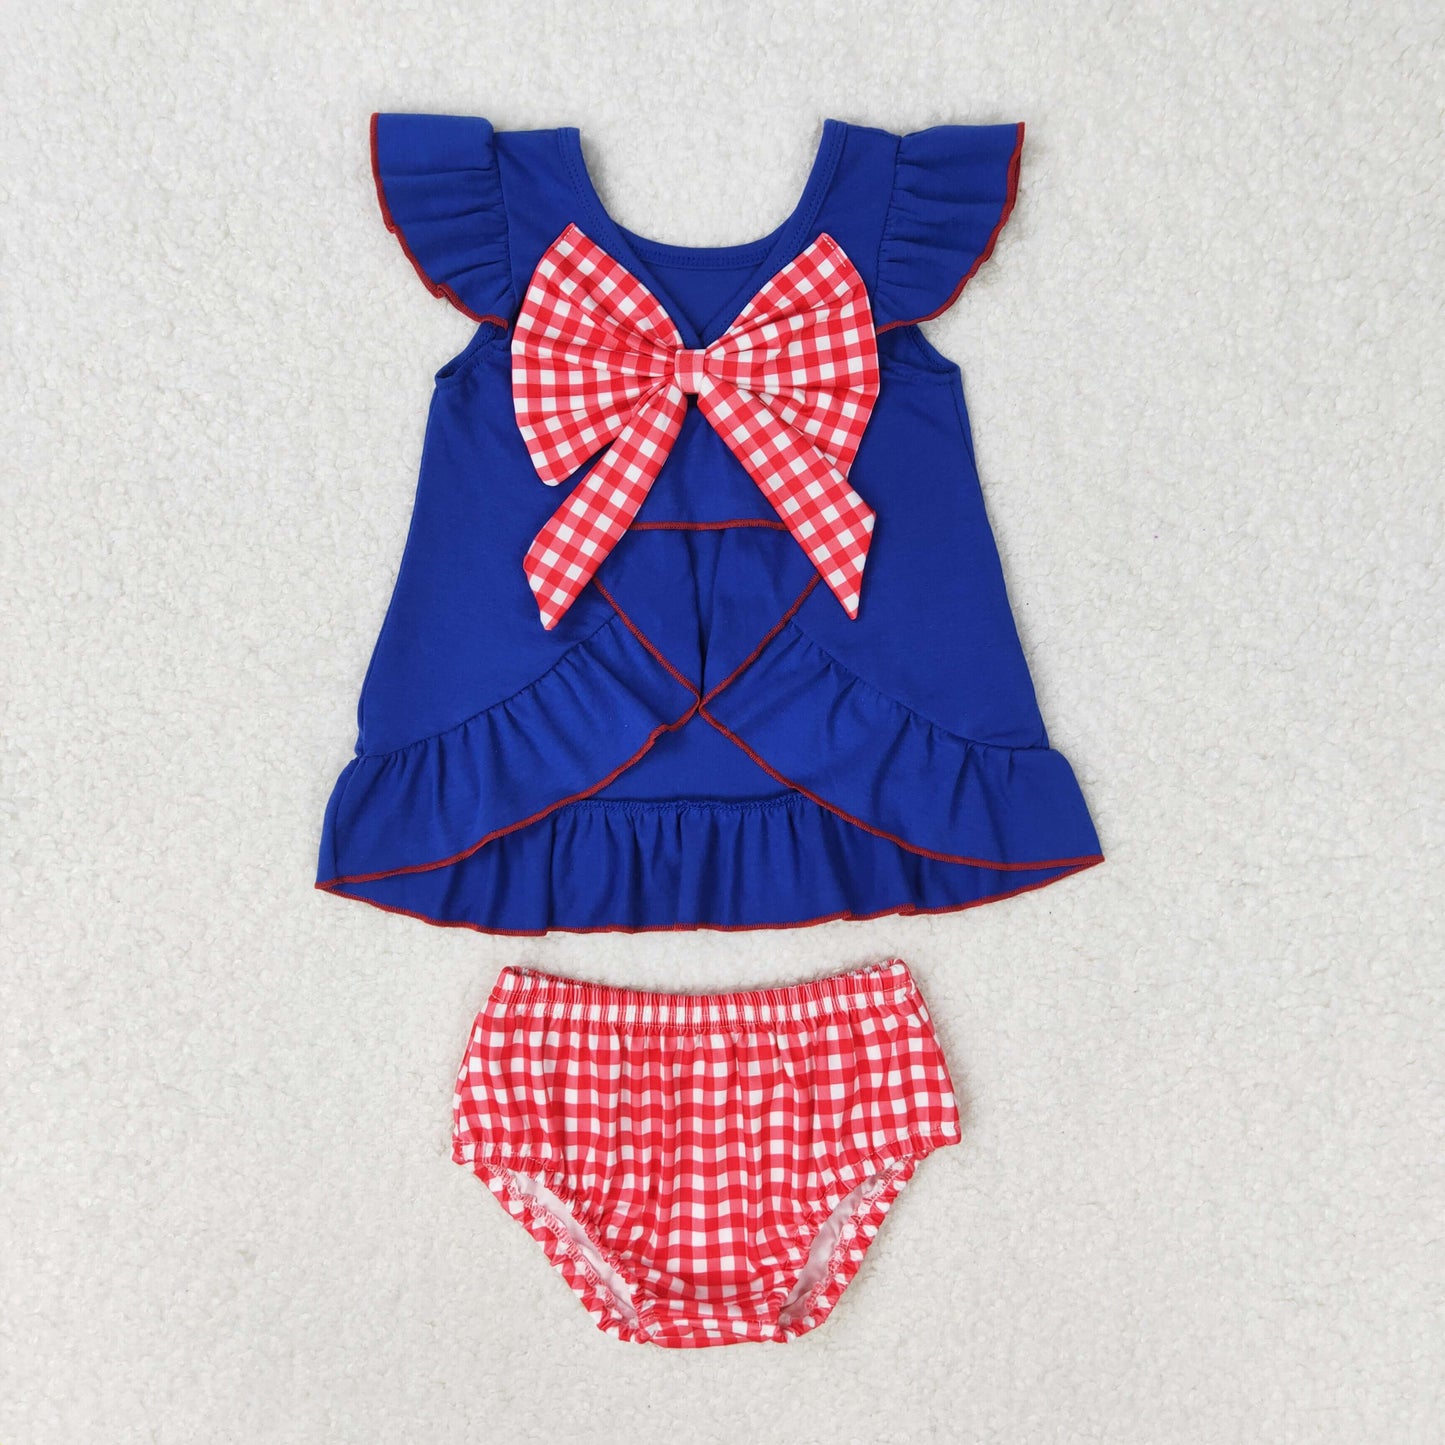 RTS no moq GBO0311 Embroidered flag bow navy blue flying sleeves red and white plaid briefs suit